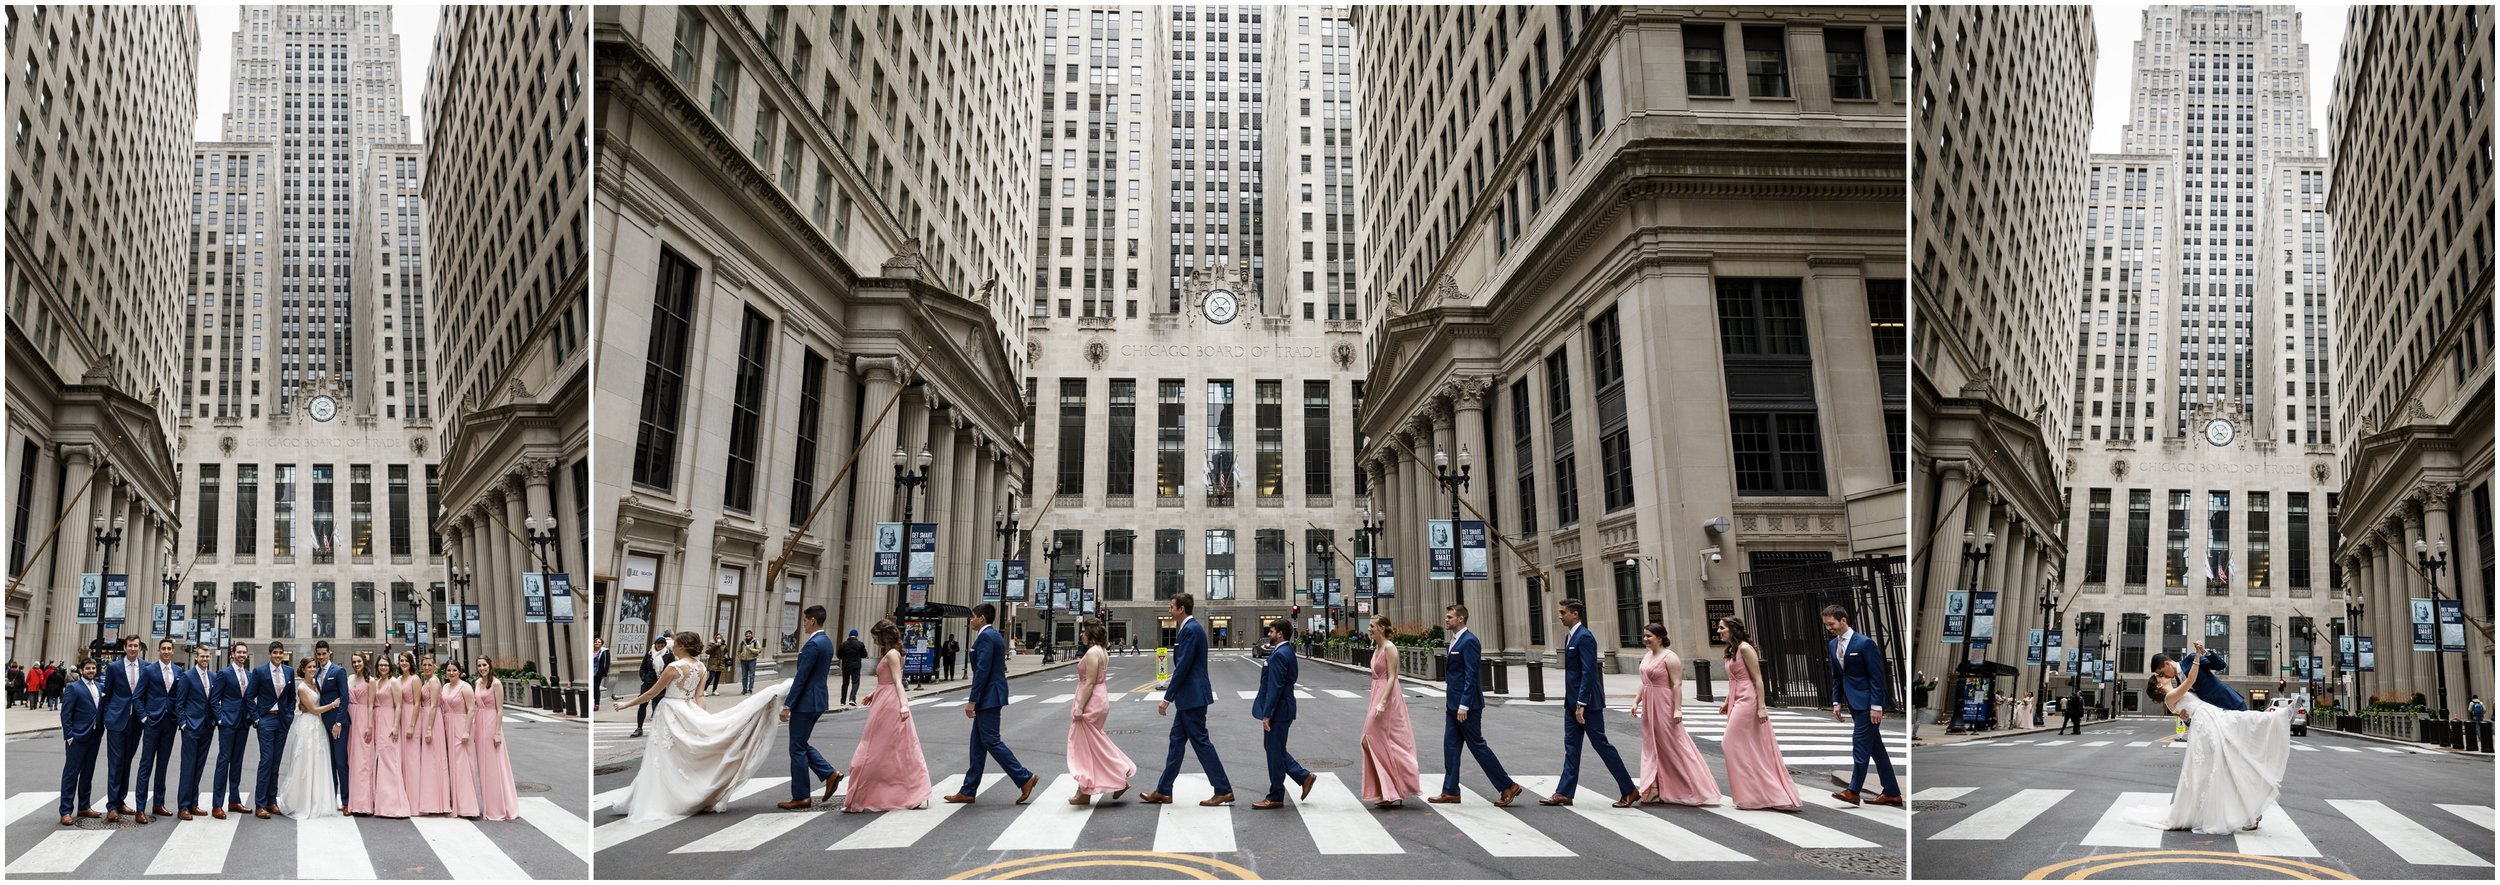 wedding party posing in front of the Chicago Board of Trade